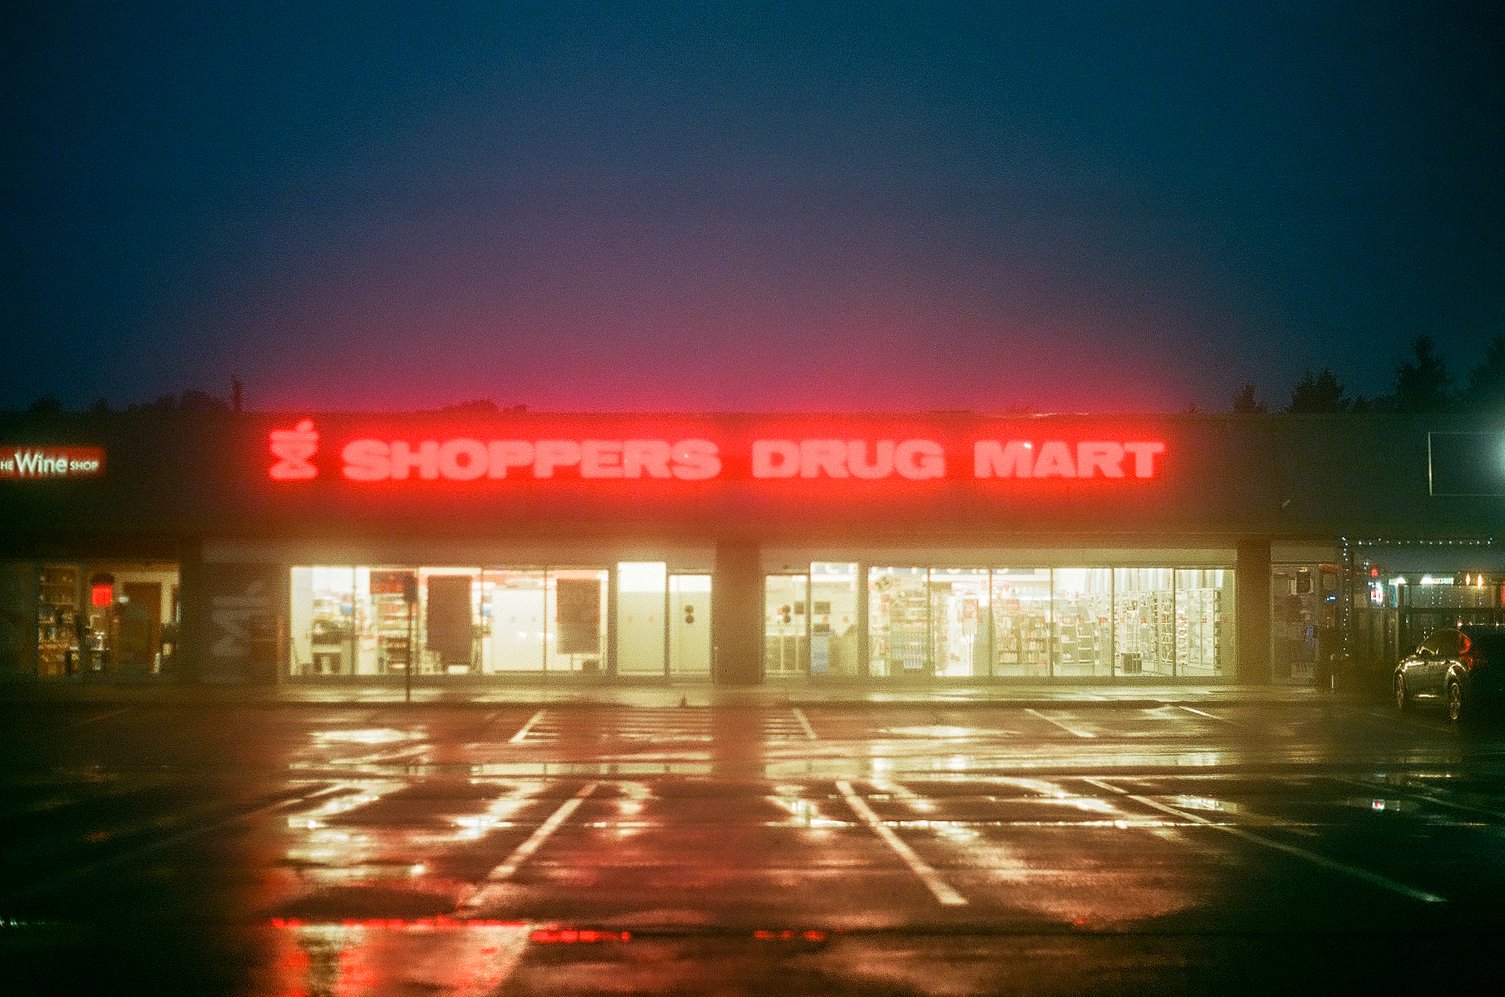  Neon storefront sign in Ontario, Canada 